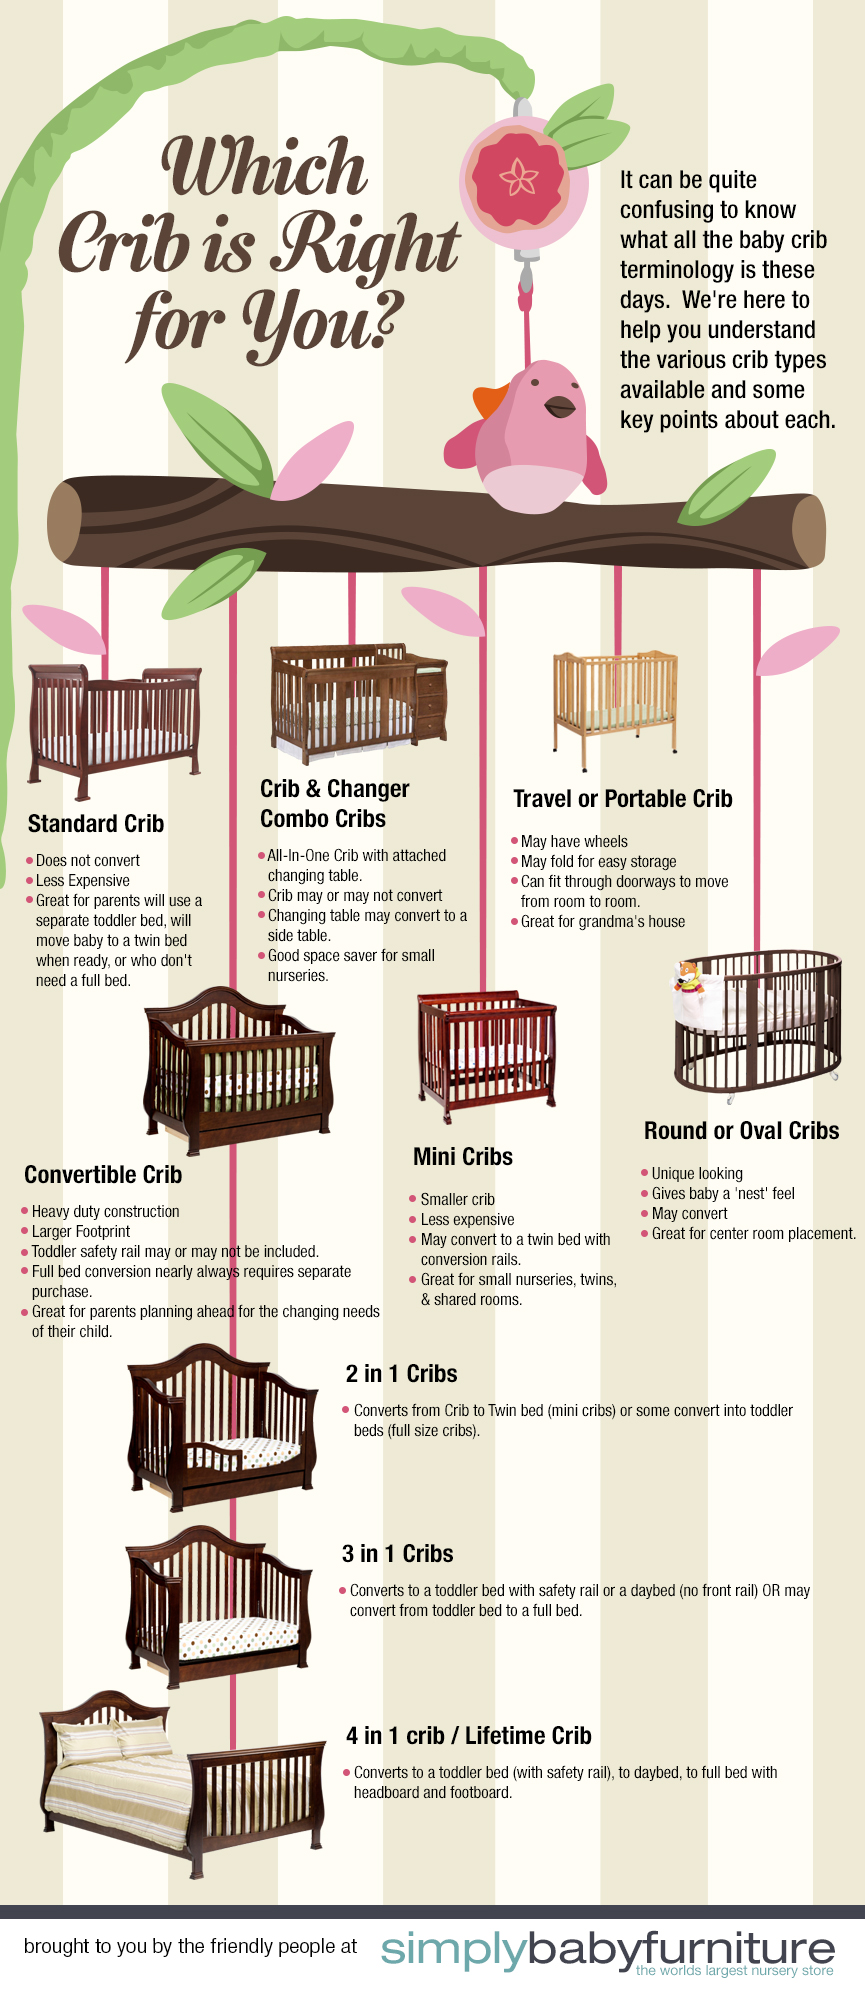 Which Crib is RIght for You?